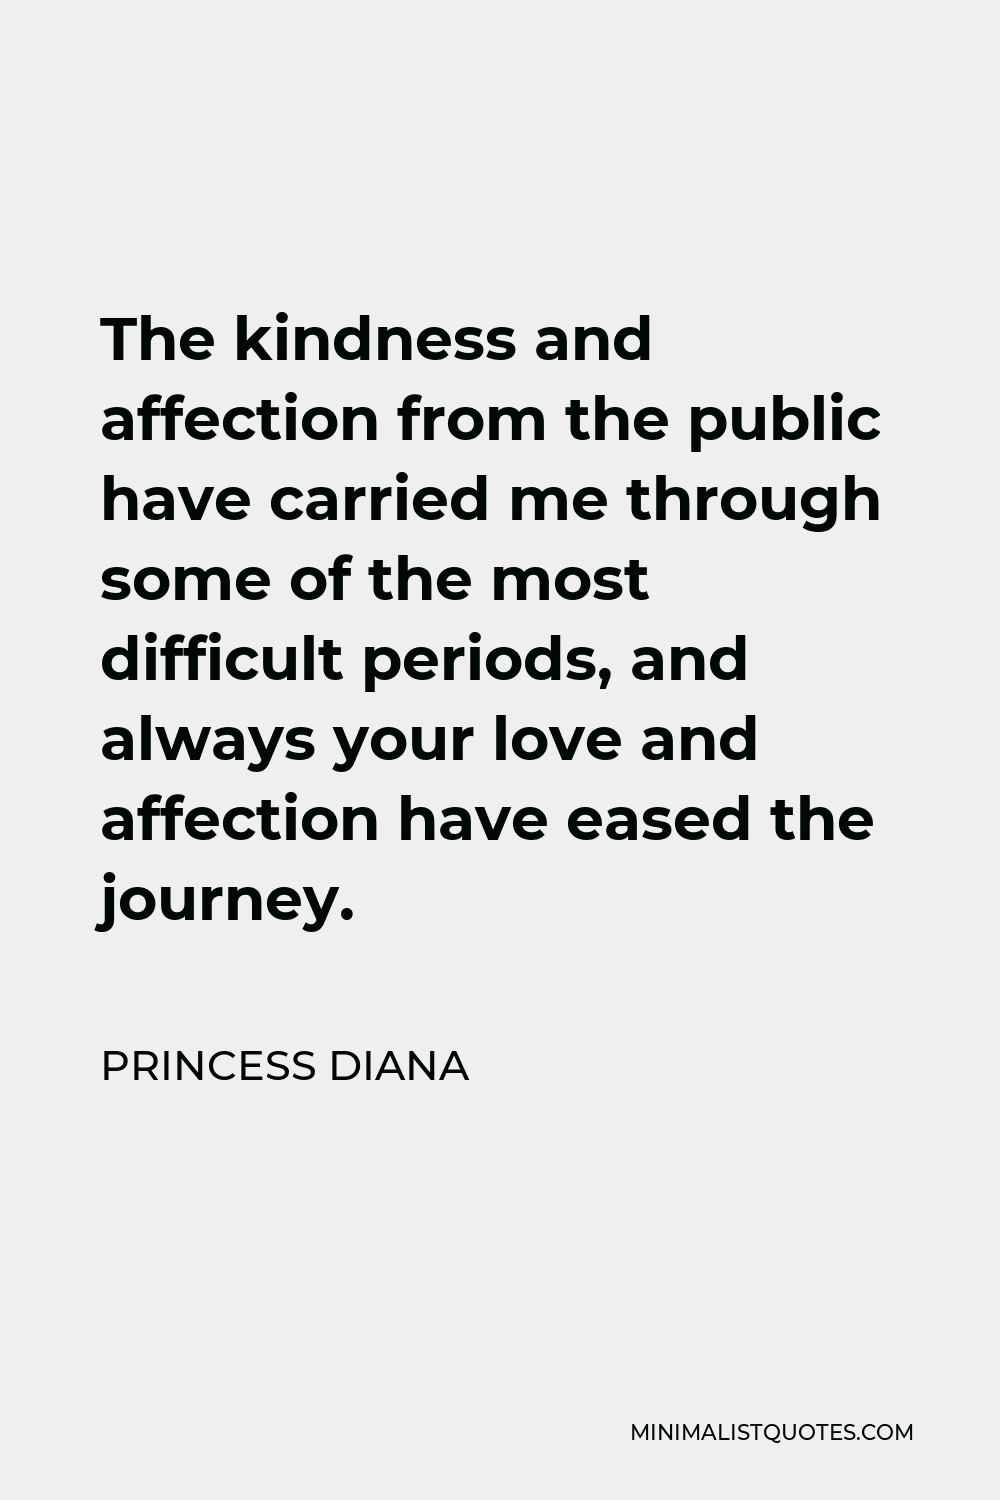 Princess Diana Quote - The kindness and affection from the public have carried me through some of the most difficult periods, and always your love and affection have eased the journey.